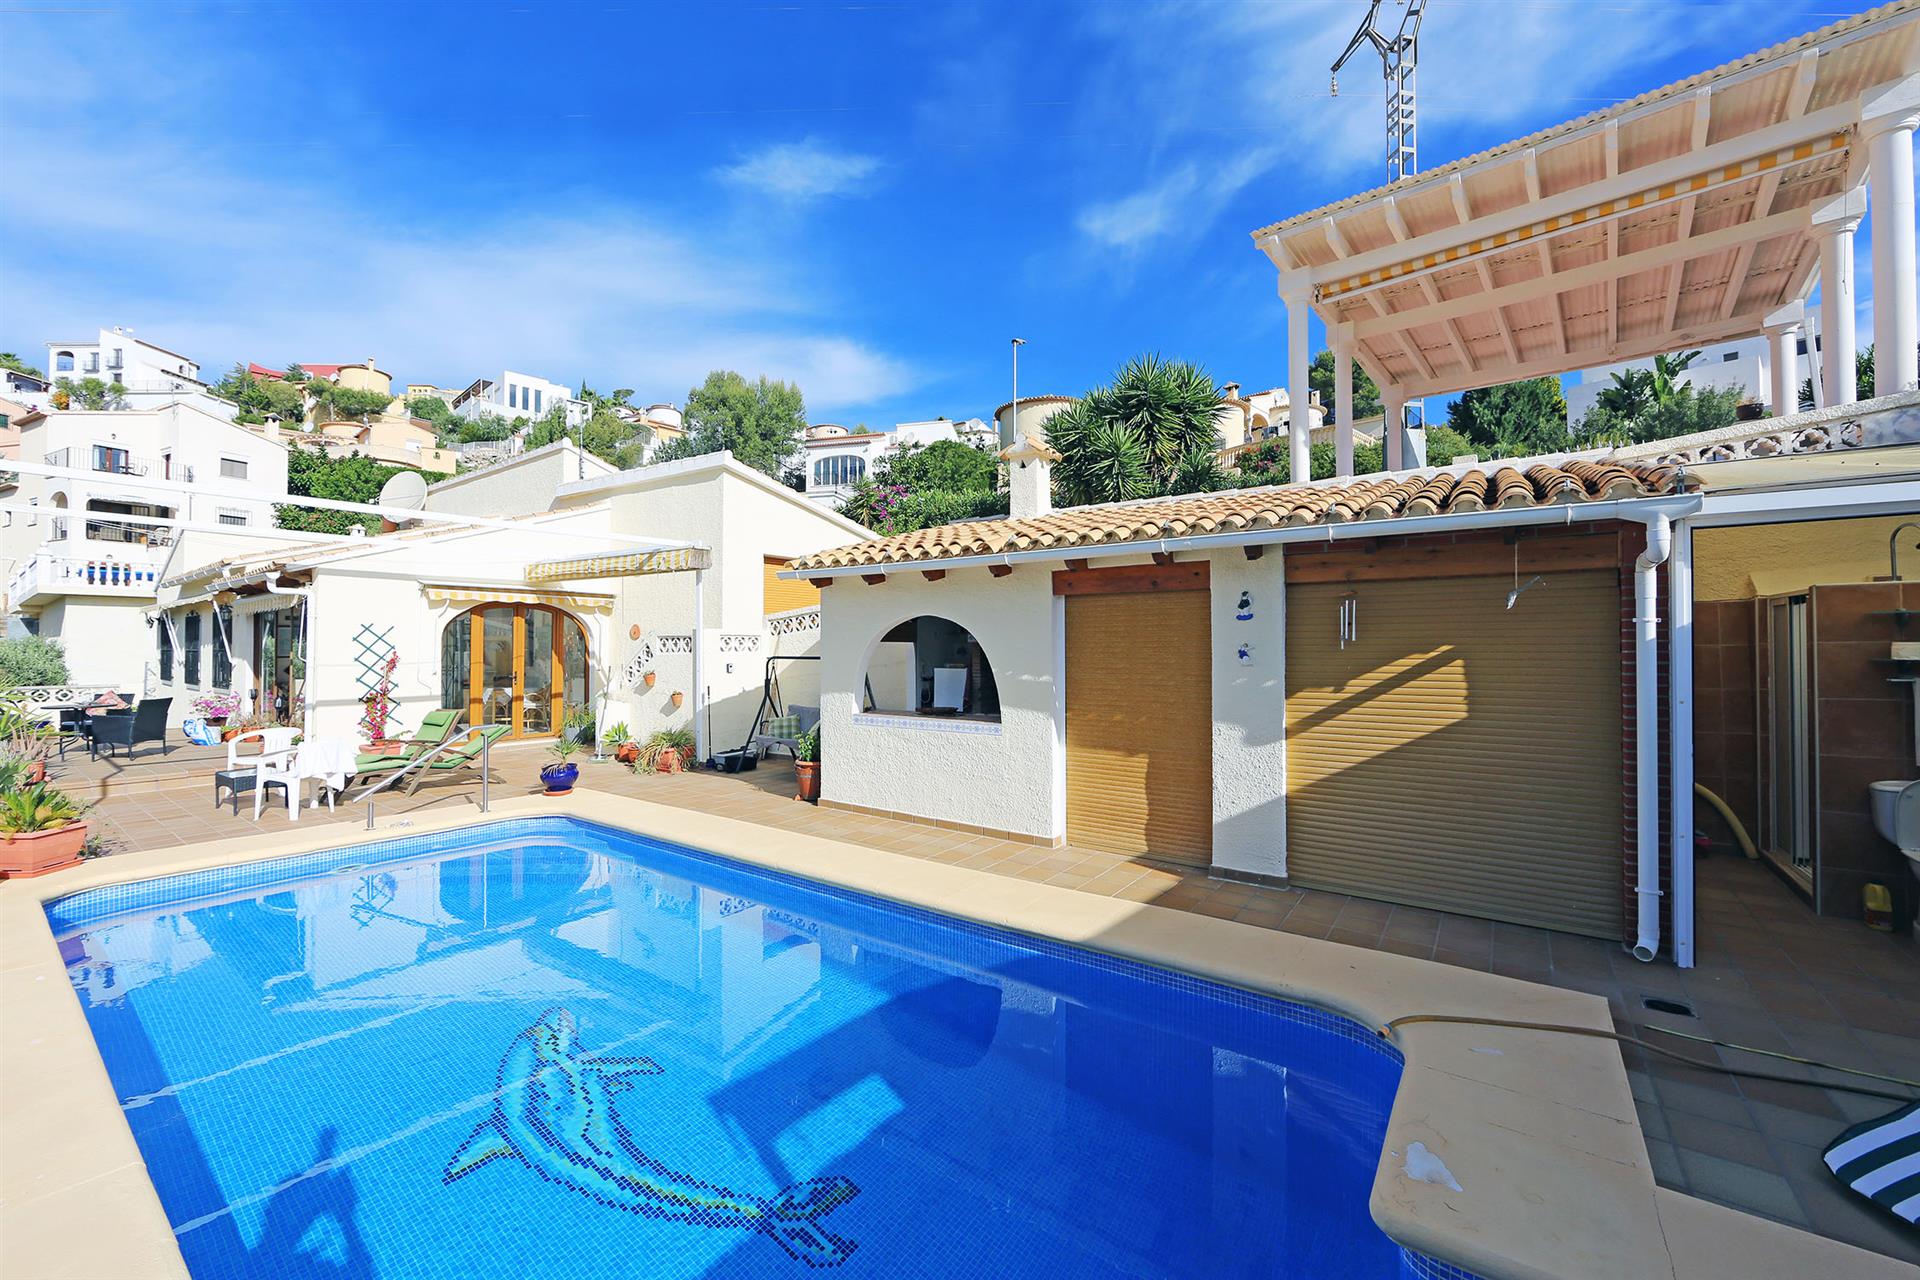 3 bedroom villa with swimming pool in Adsubia